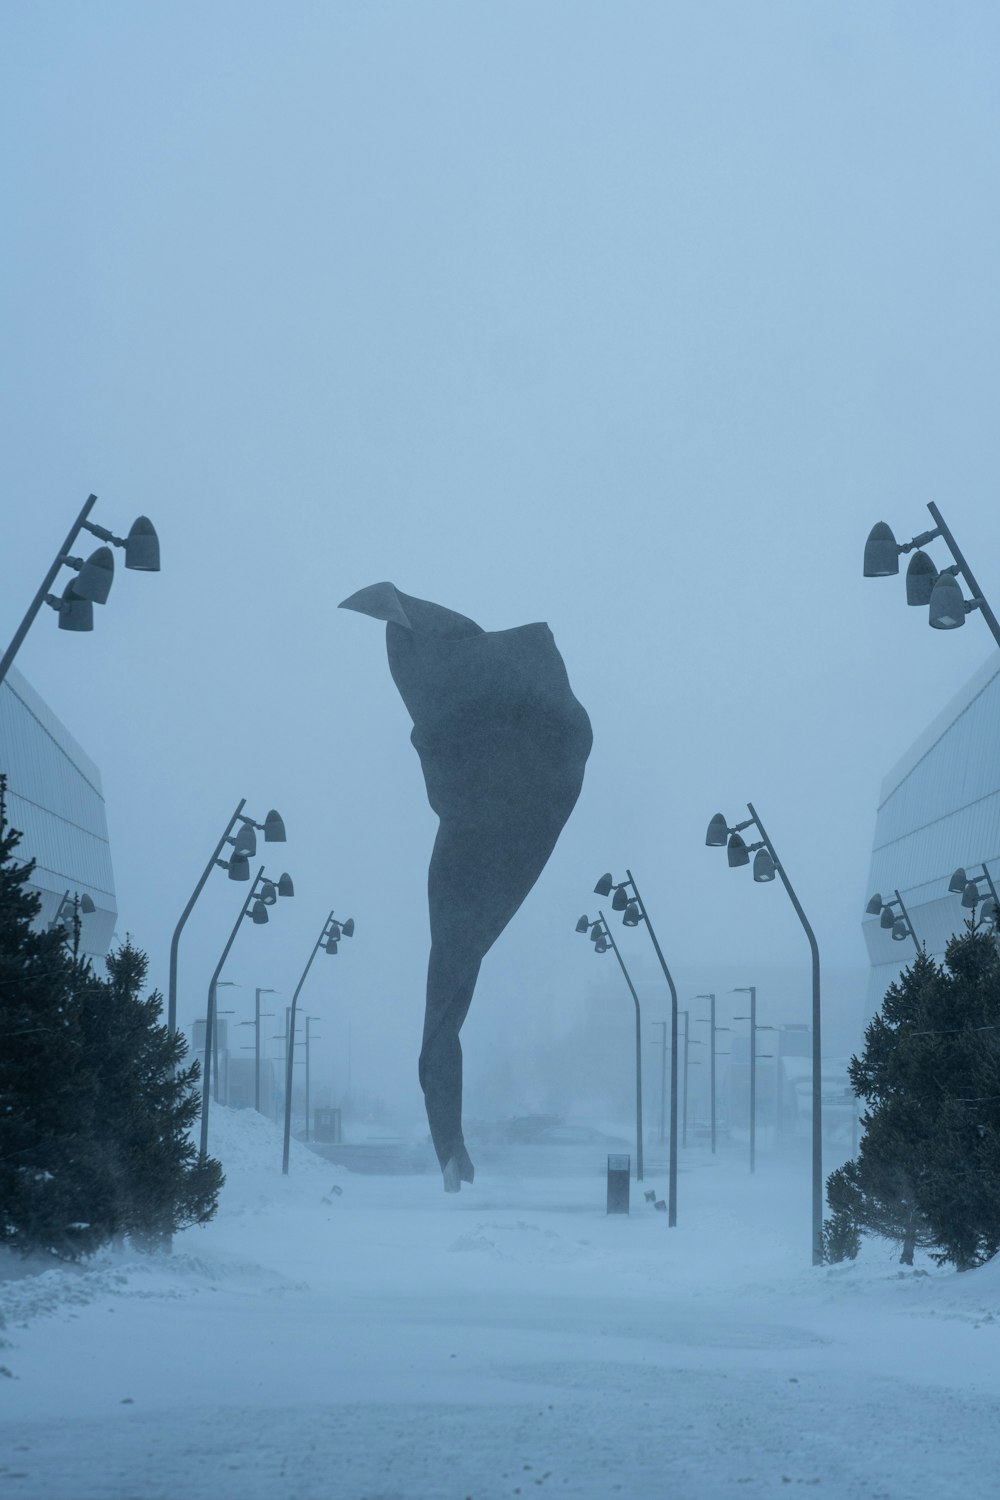 a person standing in the middle of a snowy street